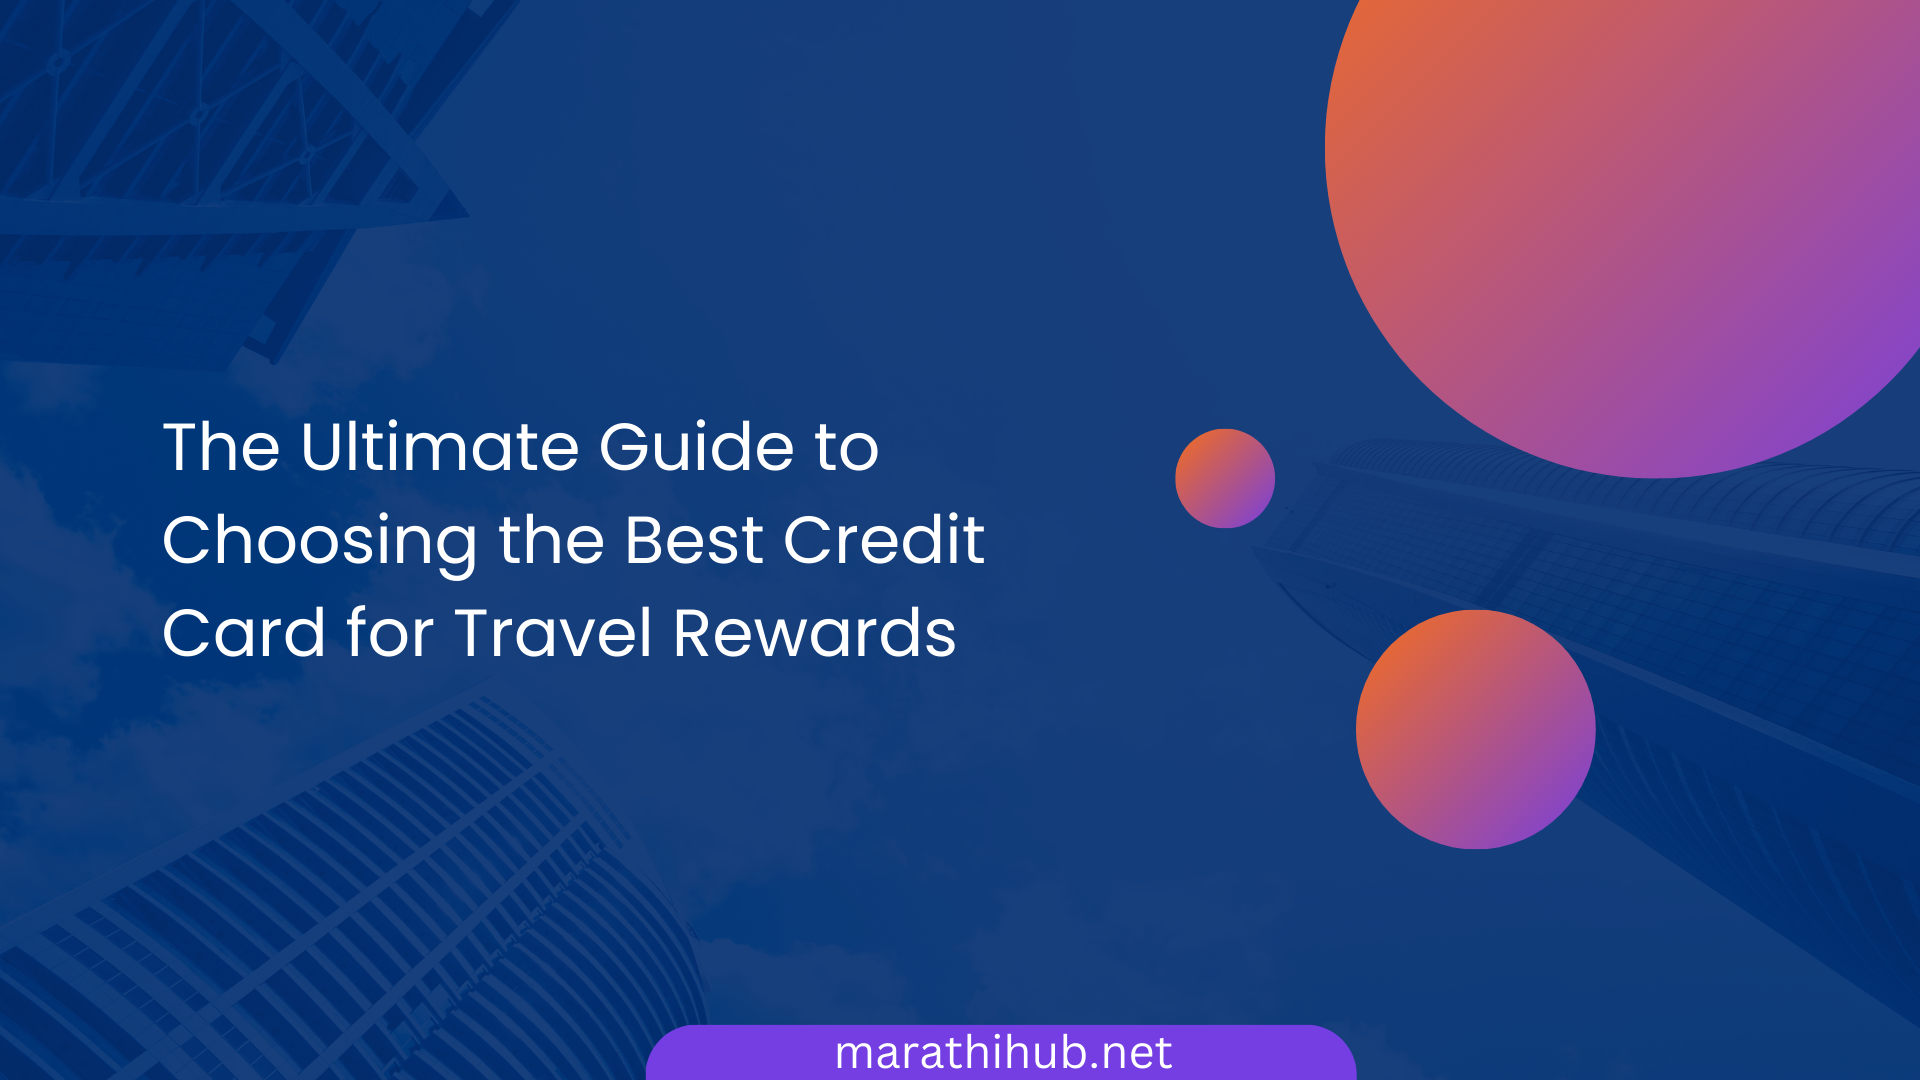 The Ultimate Guide to Choosing the Best Credit Card for Travel Rewards